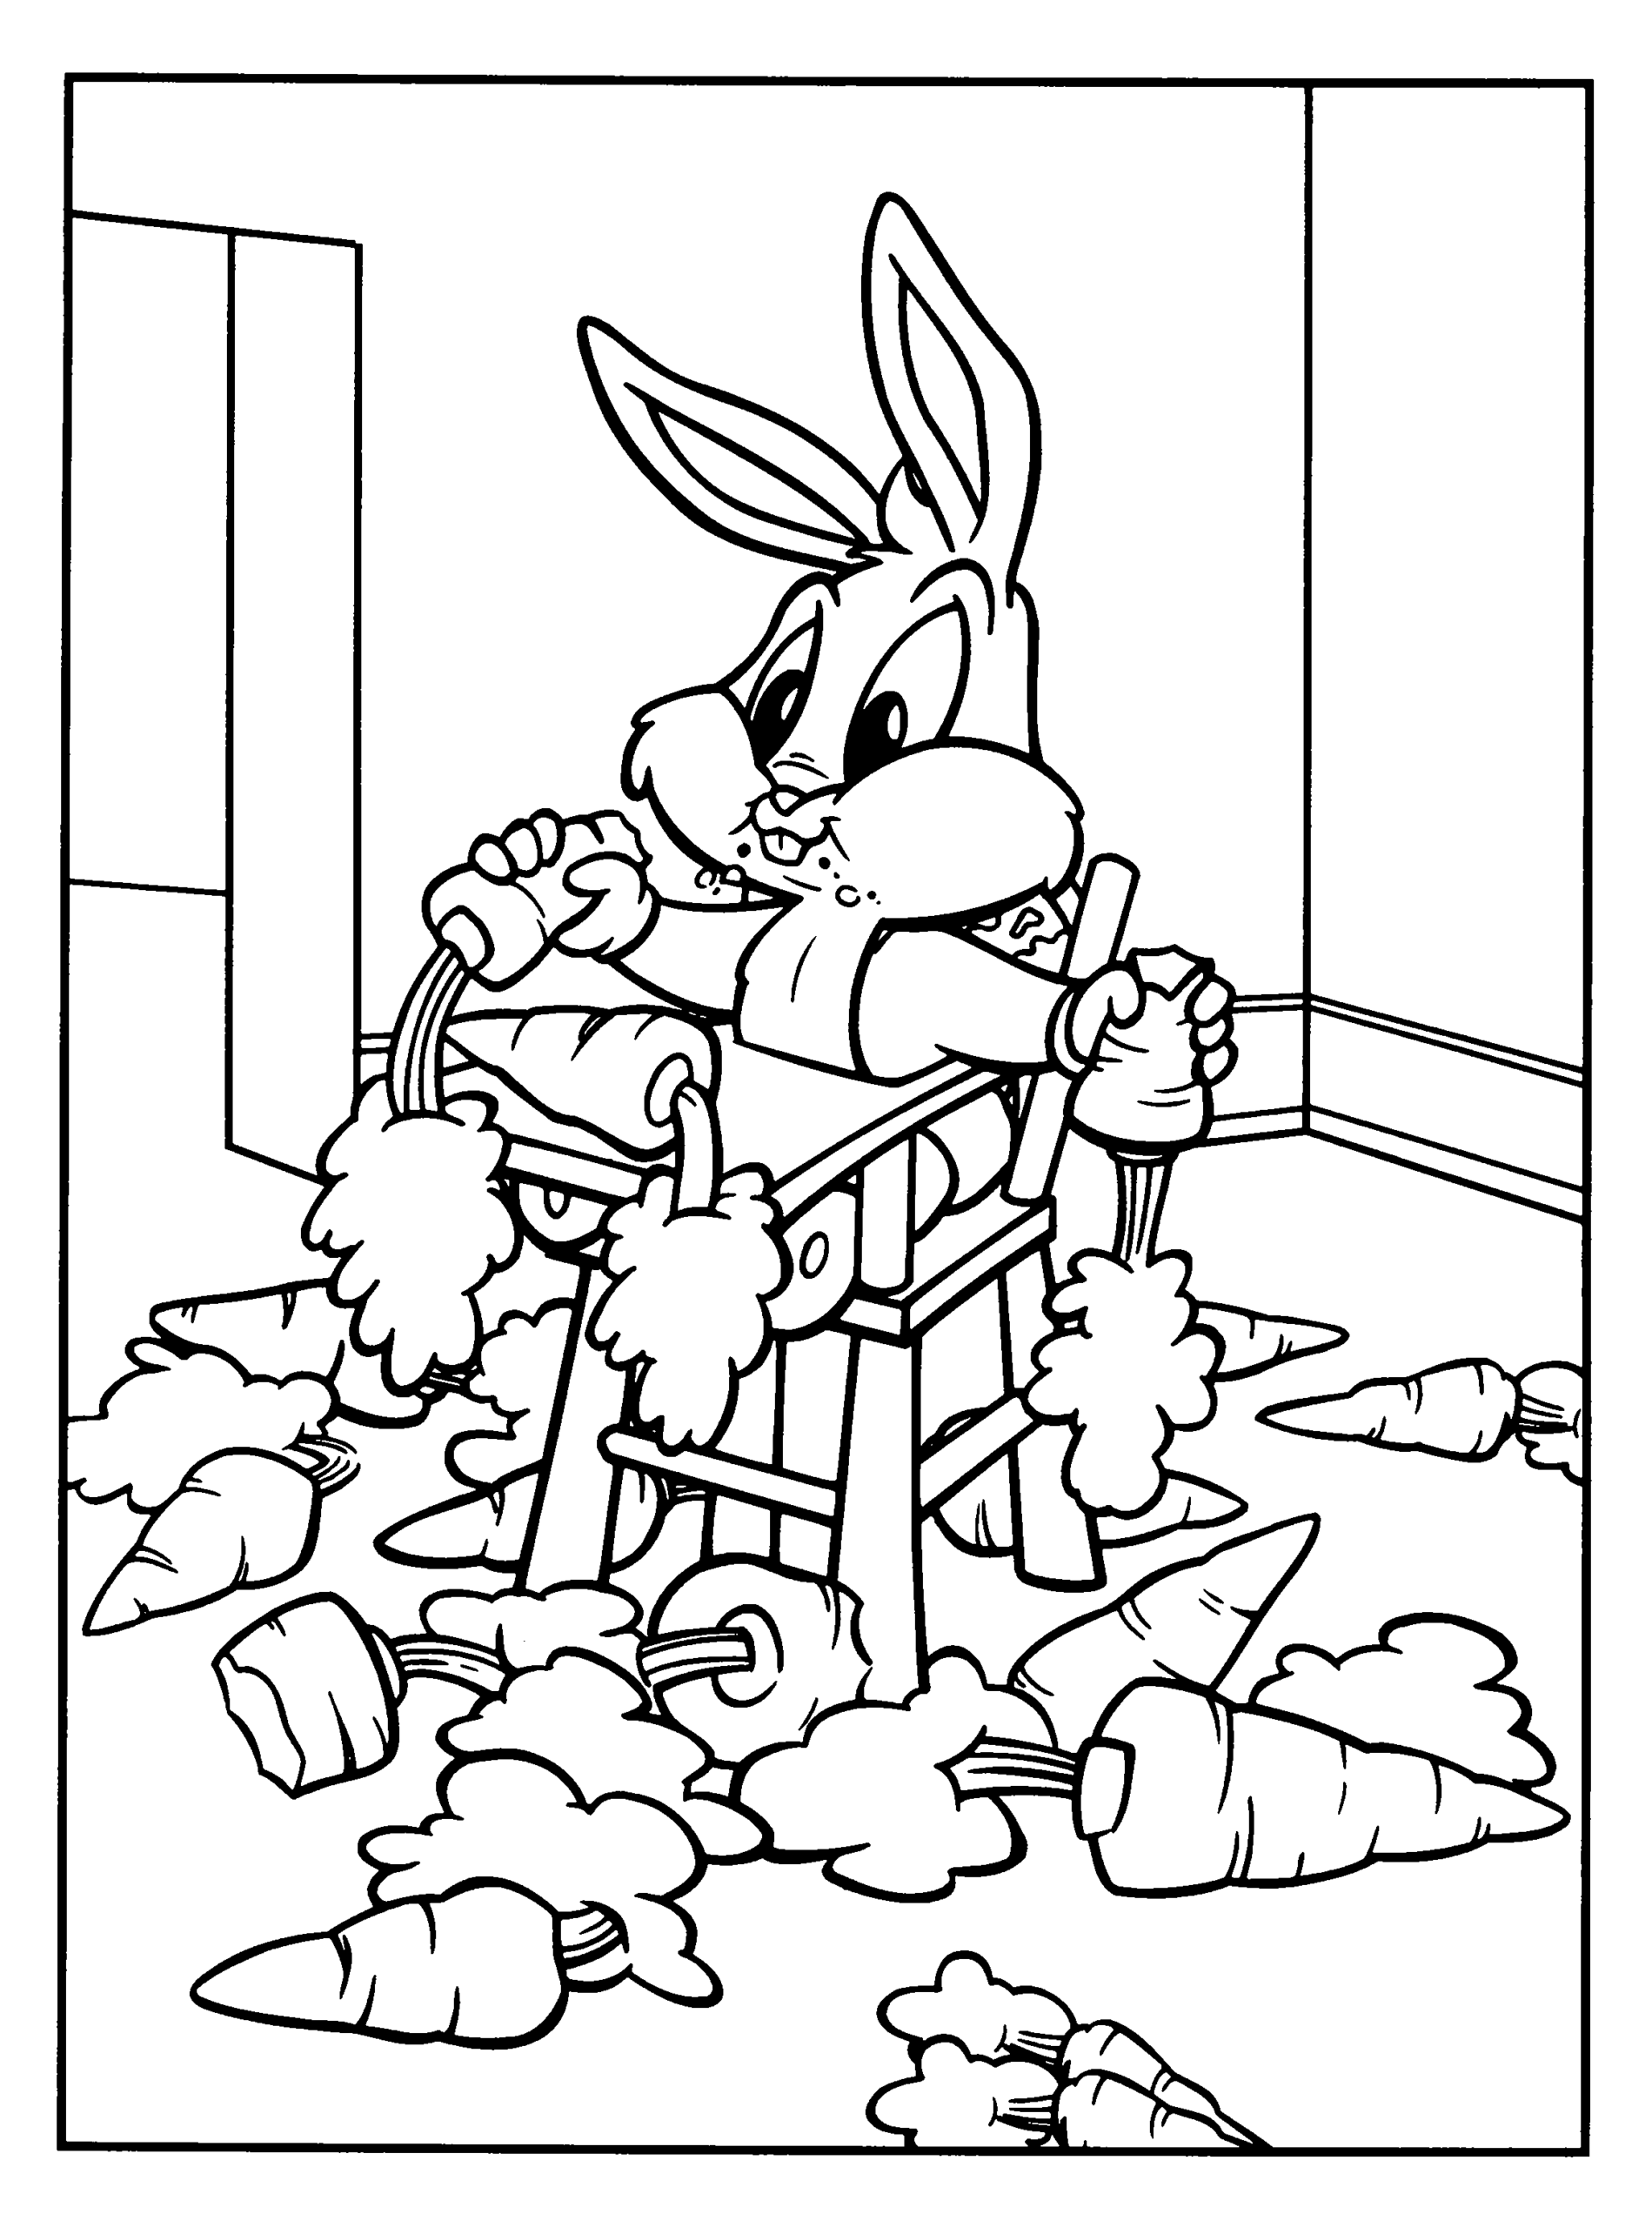 Looney Tunes Coloring Pages TV Film looney tunes 18 Printable 2020 04584 Coloring4free